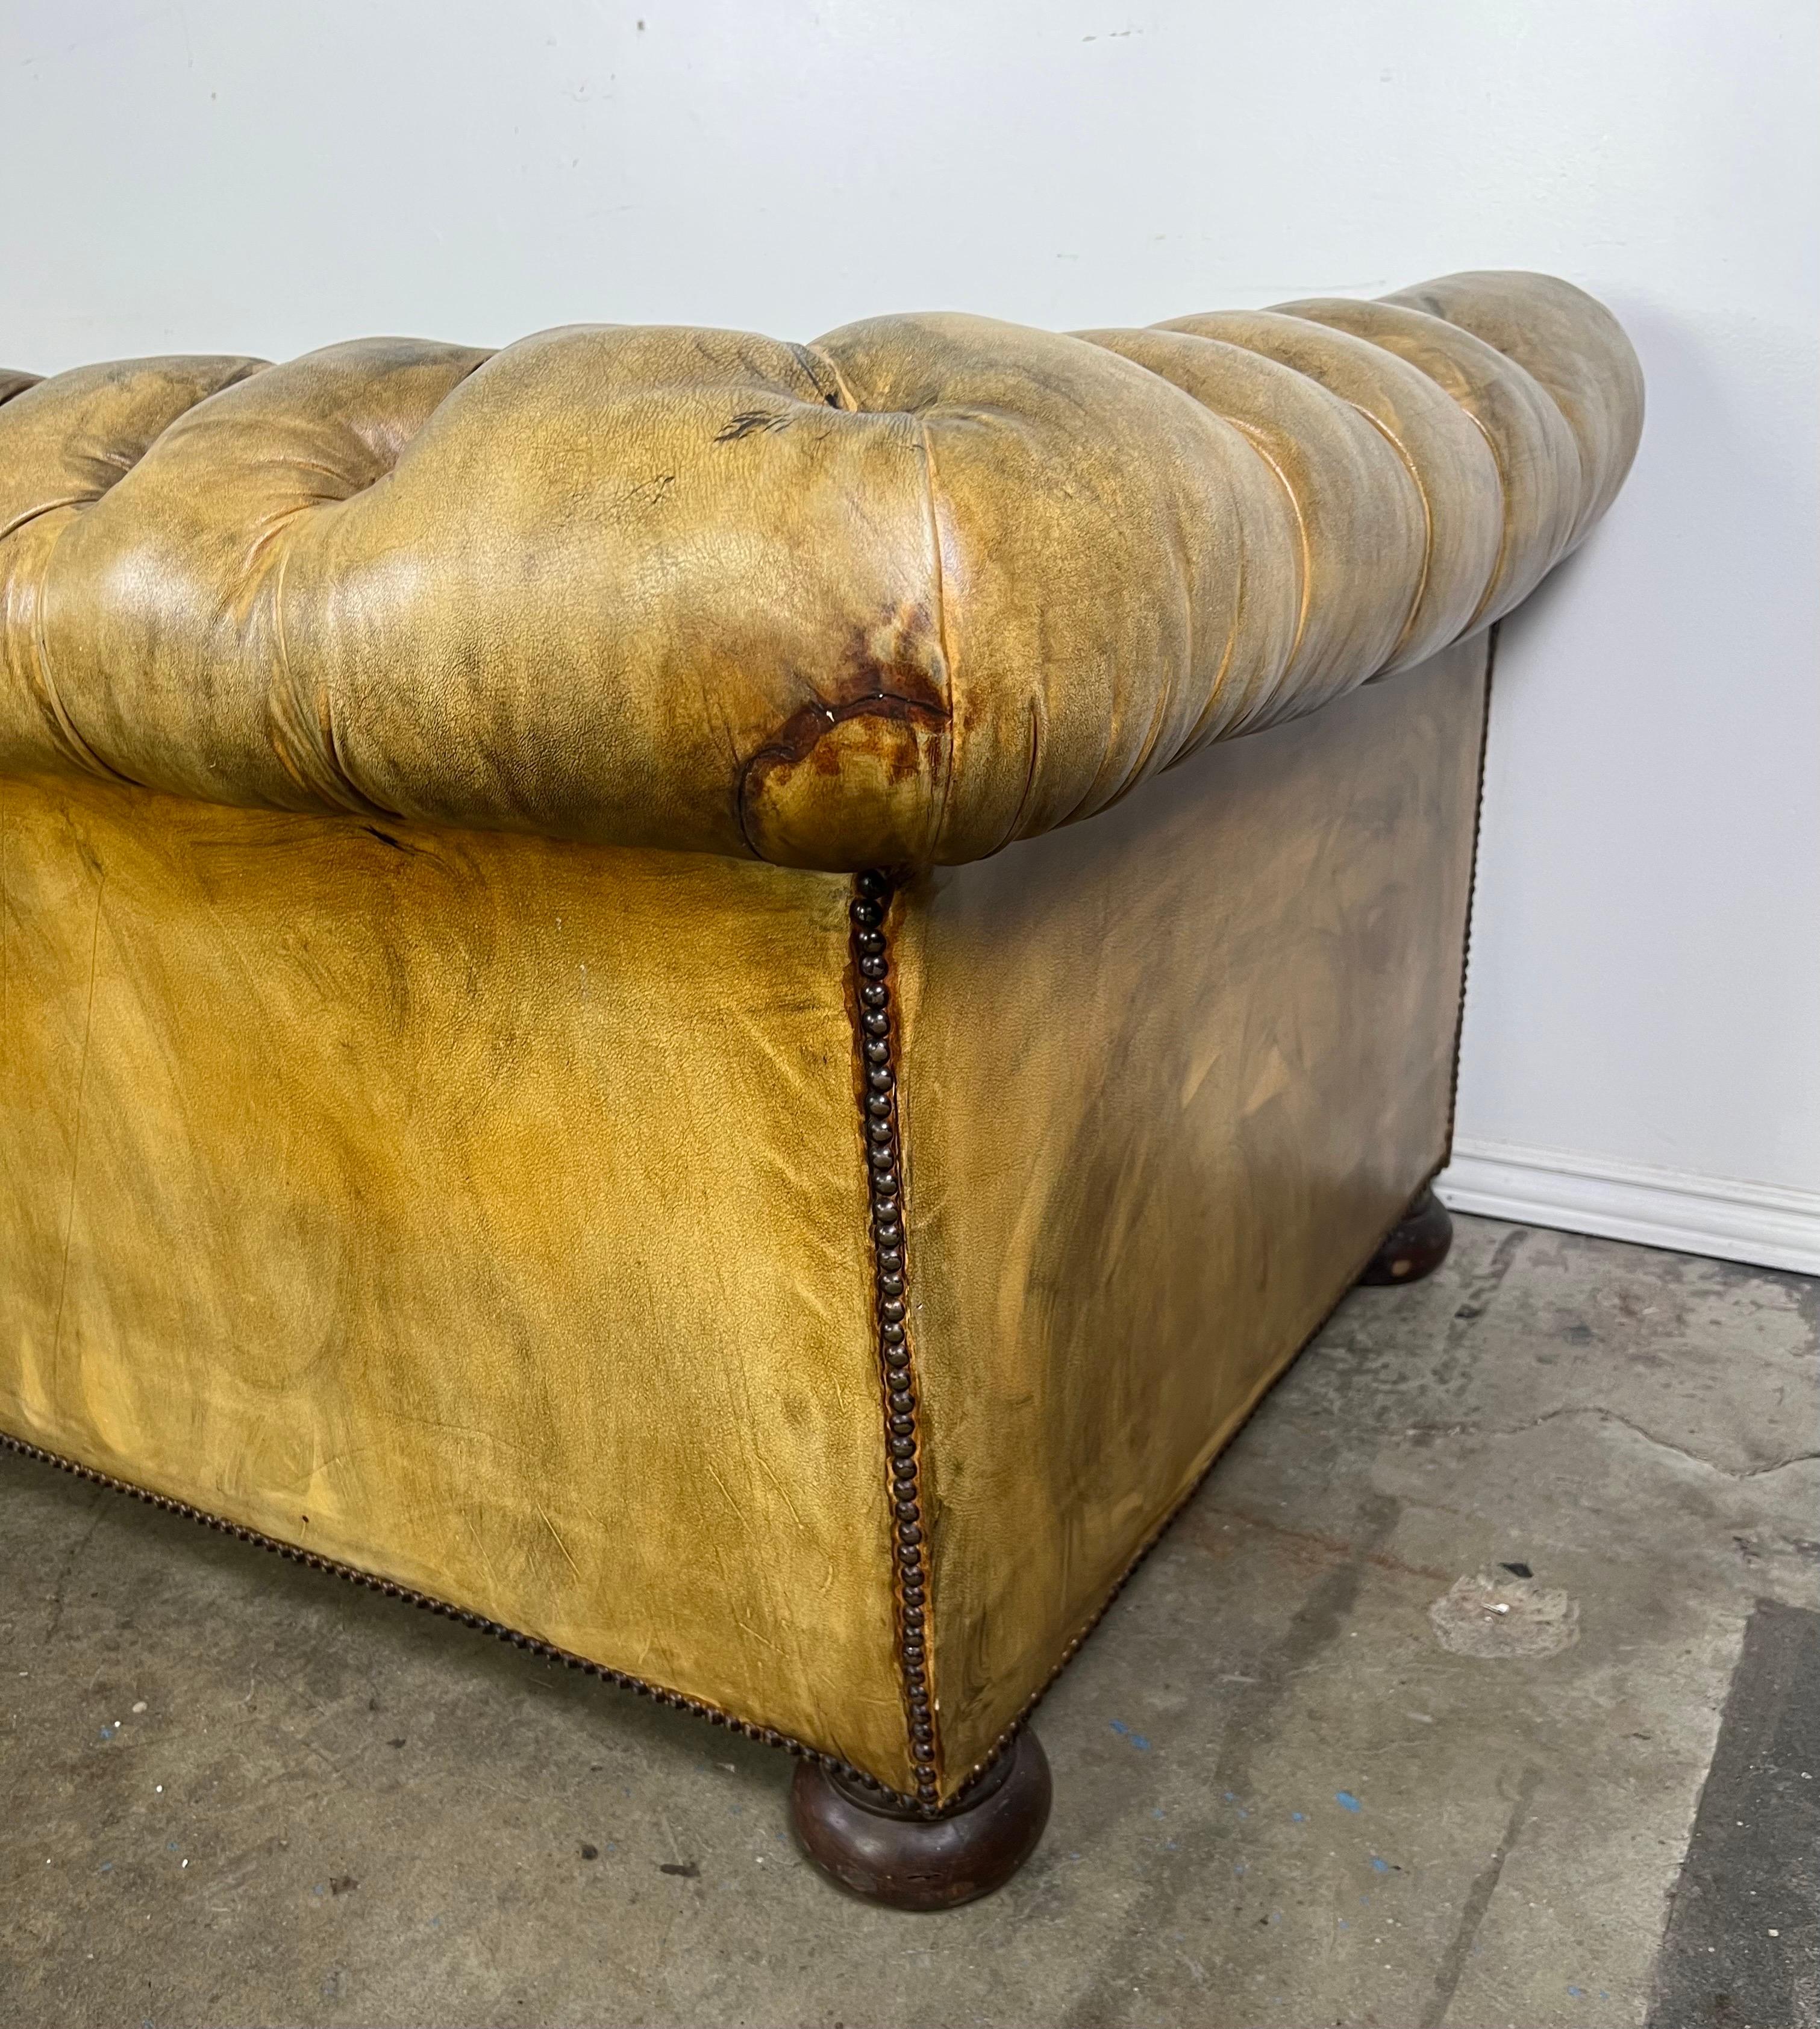 Vintage English Chesterfield Style Leather Tufted Sofa C. 1920's For Sale 13